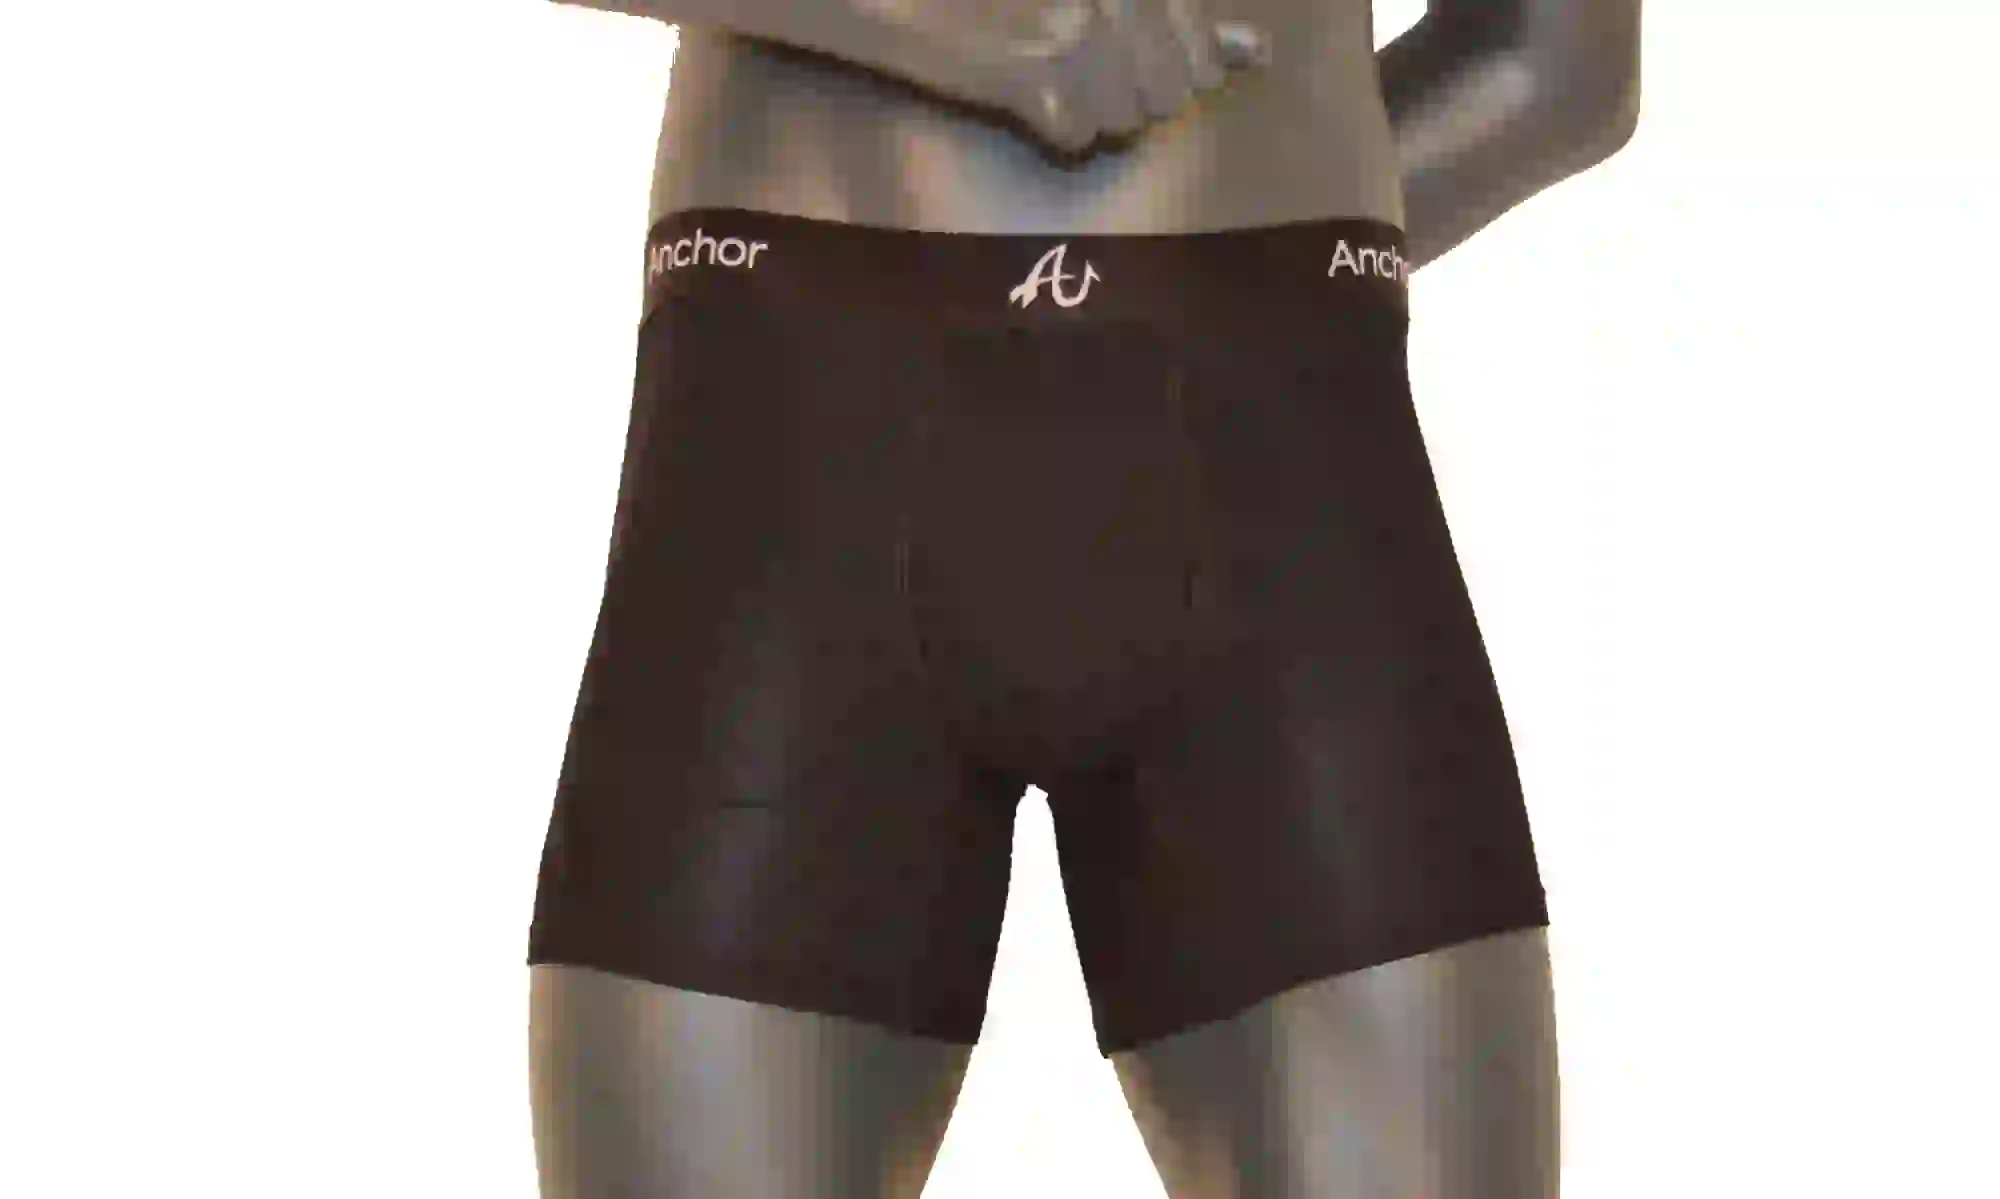 Black pair of Anchor Underwear boxer briefs on a gray mannequin. Picture taken from the front. Low quality-placeholder image